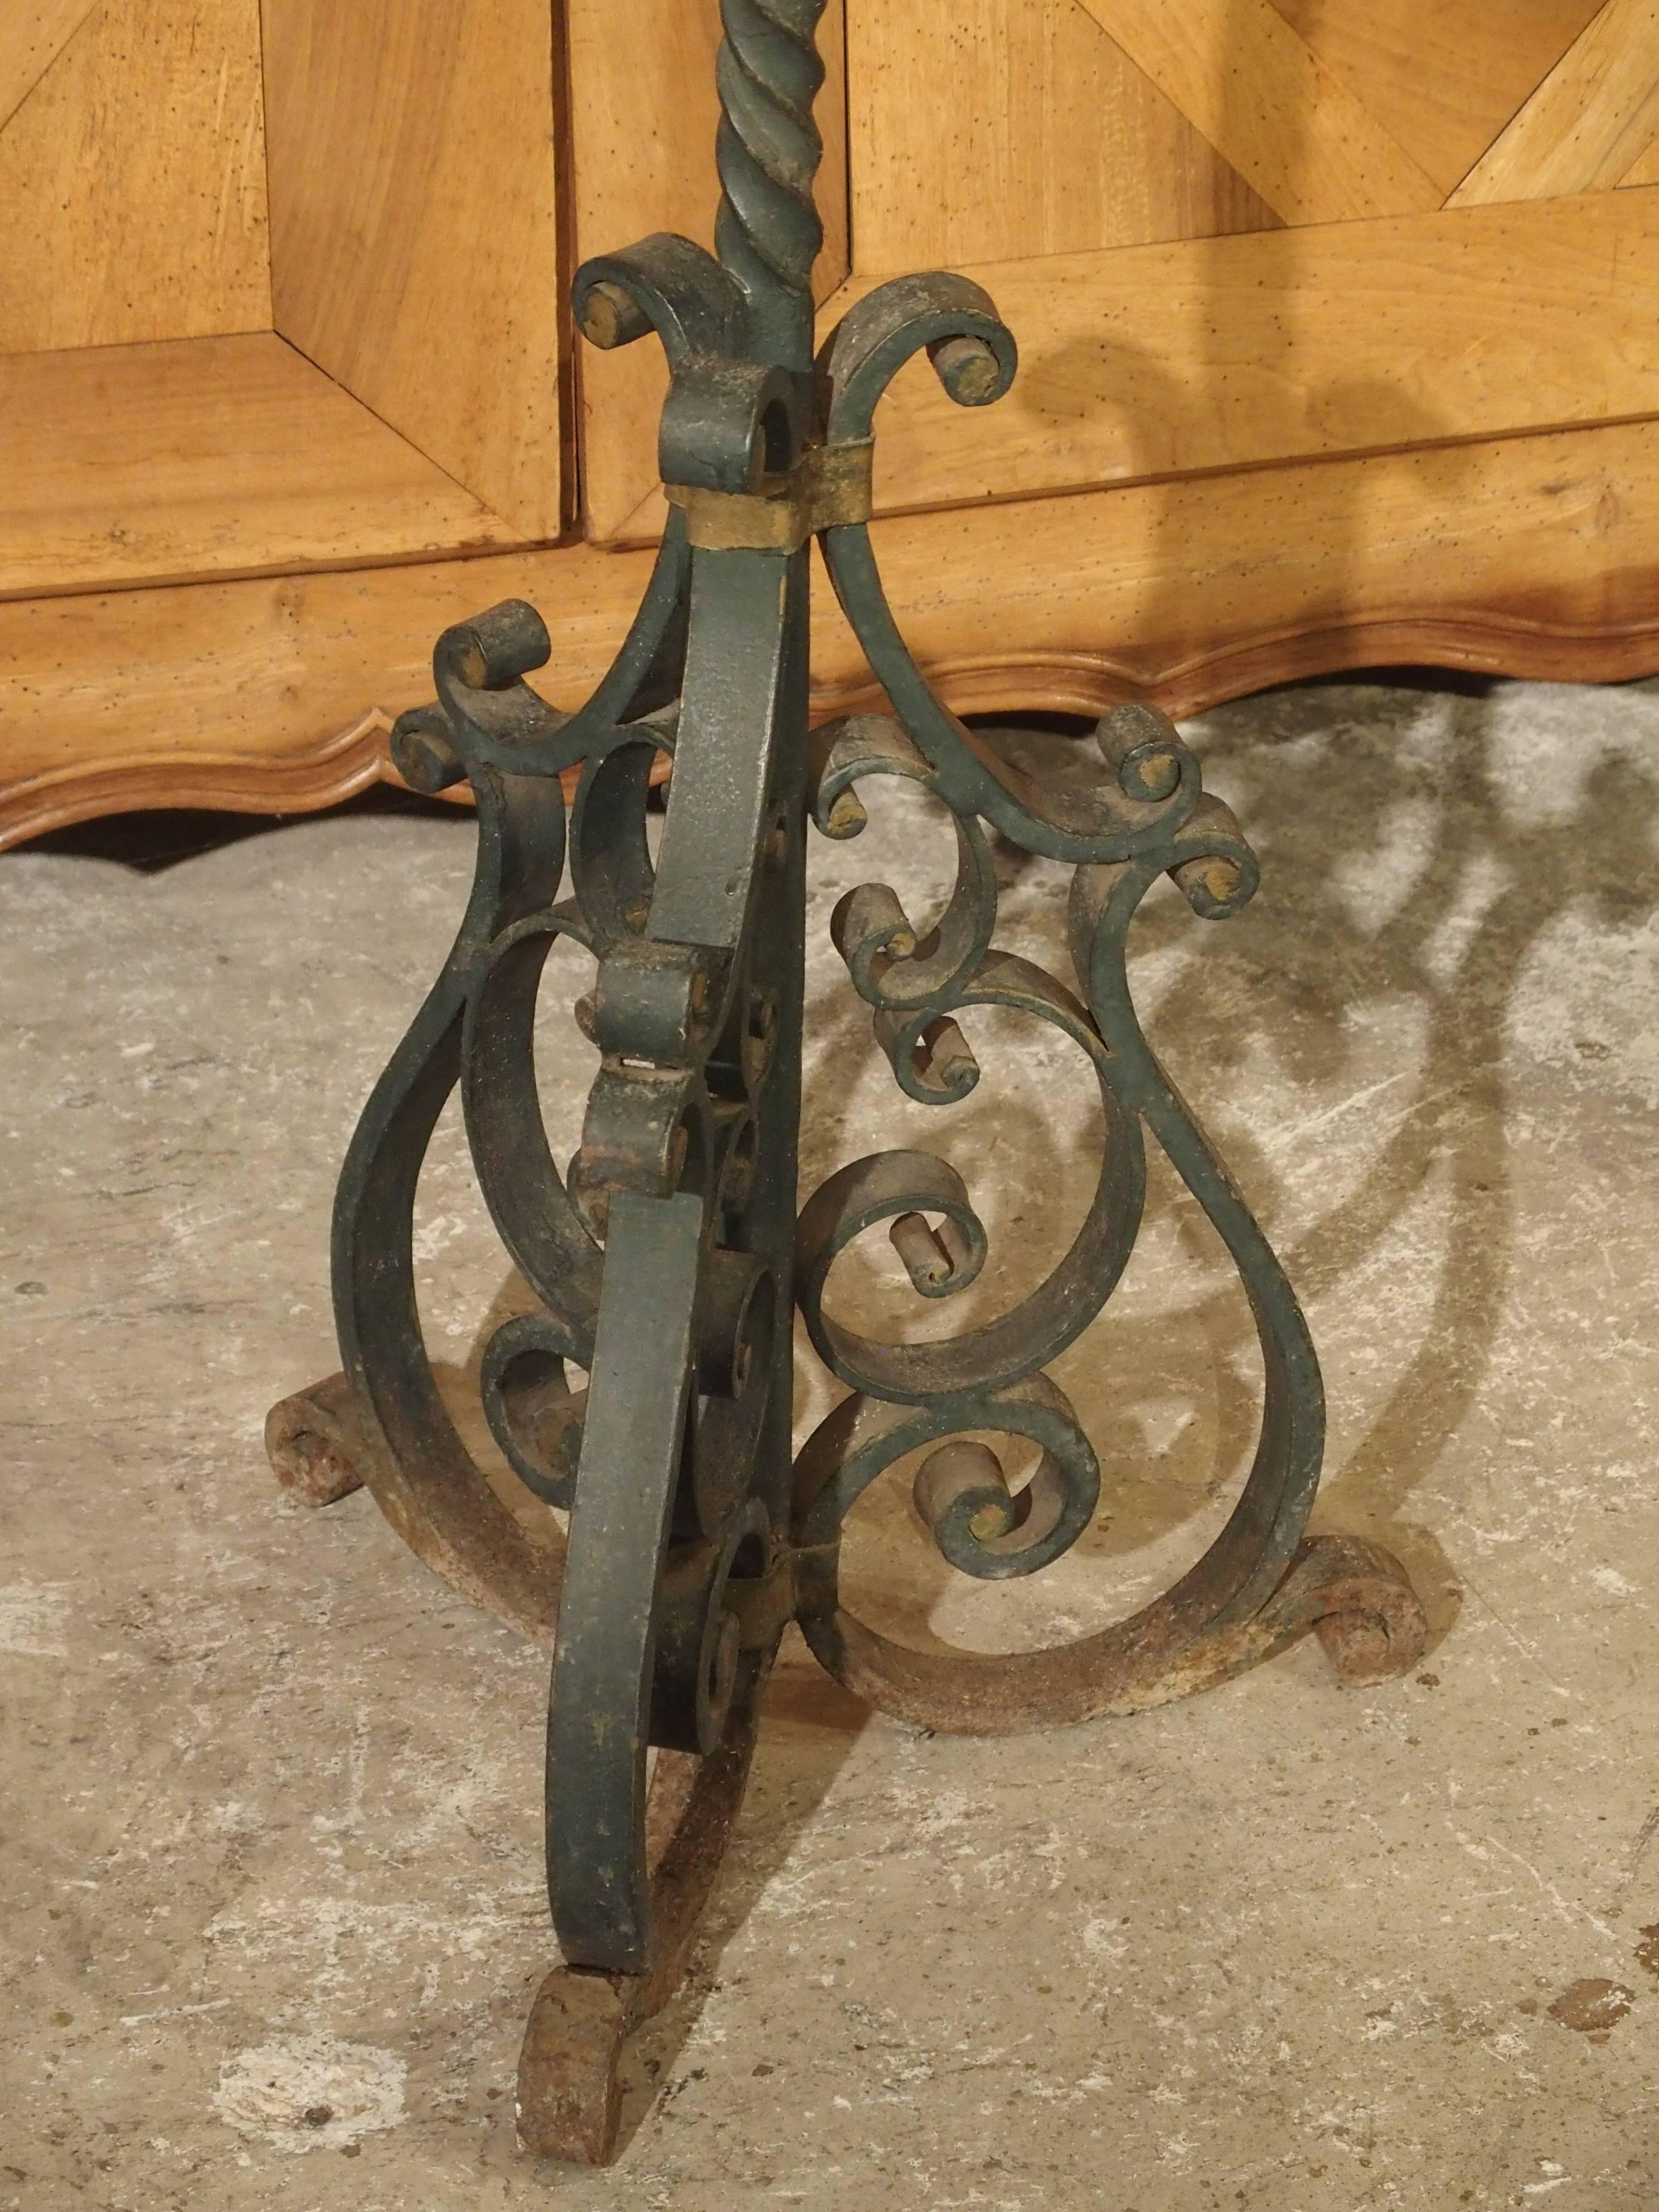 This five light, antique French cast iron torchere has been painted deep green with gold colored bands around the motifs. The motifs are trefoils, C-scrolls, and S-scrolls. There is a turned central stem with a large ball motif at the center ending